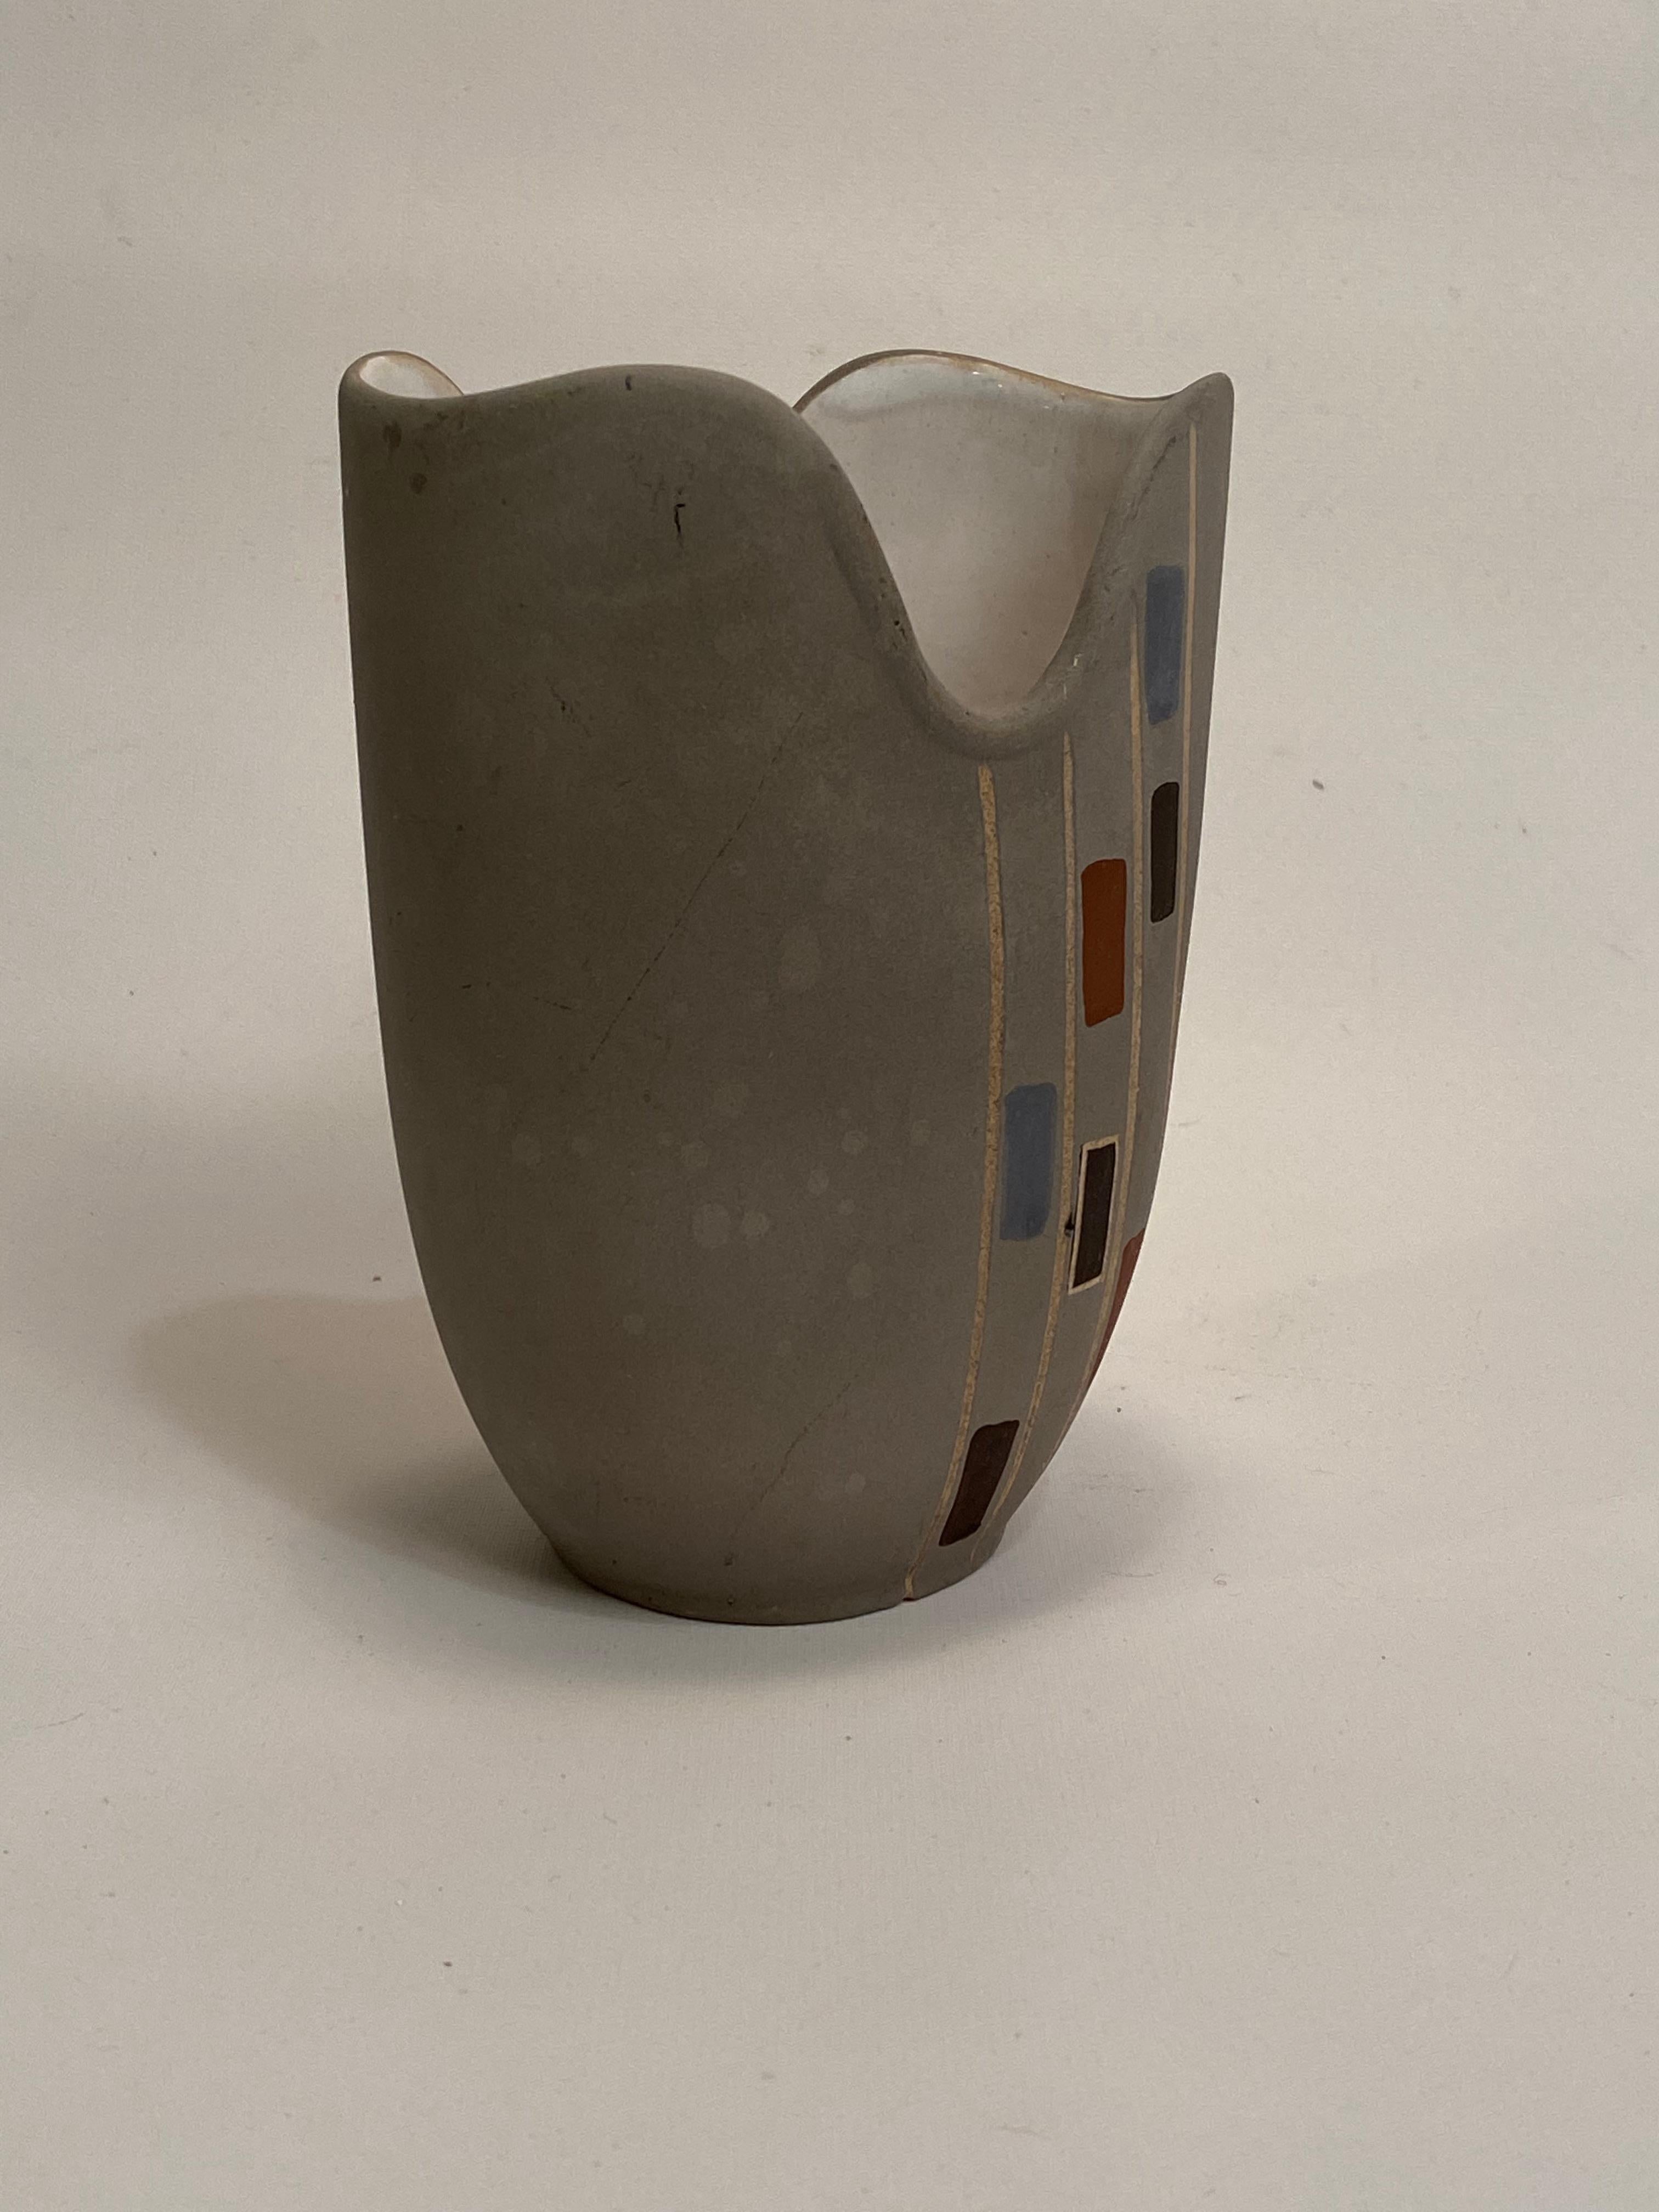 Light gray ceramic body decorated with a mosaic pattern. Nice lines and unusual form. Fully signed and numbered on the bottom. Circa 1950-60. Good condition with no visible chips, cracks, hairlines or restorations. Crazing to the white glazed